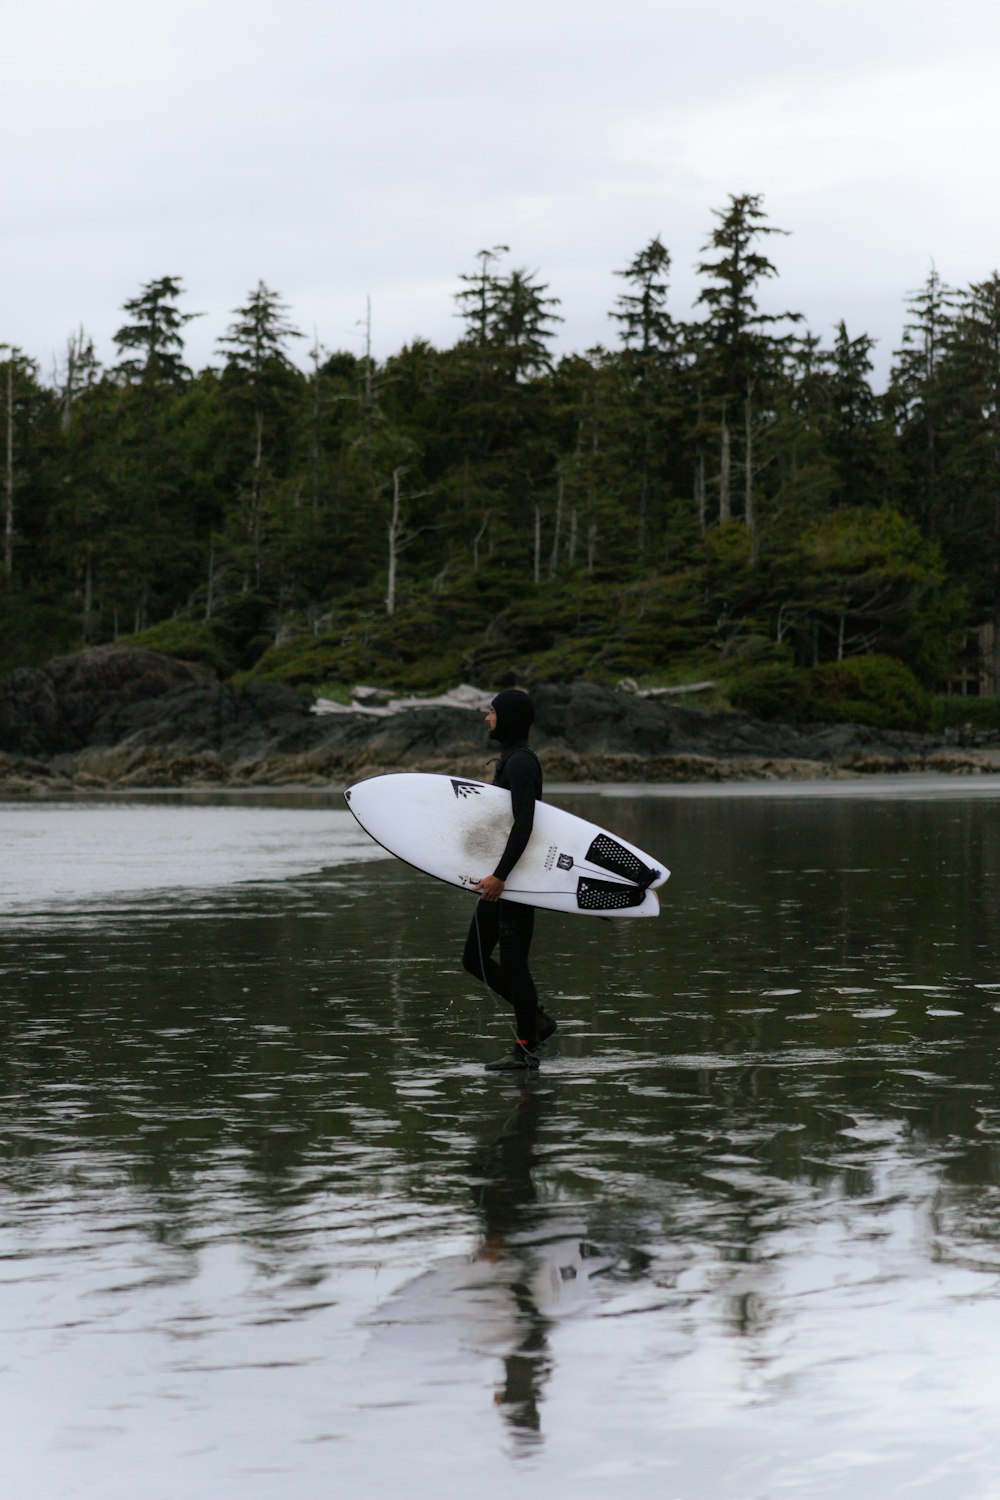 a man carrying a surfboard in the water